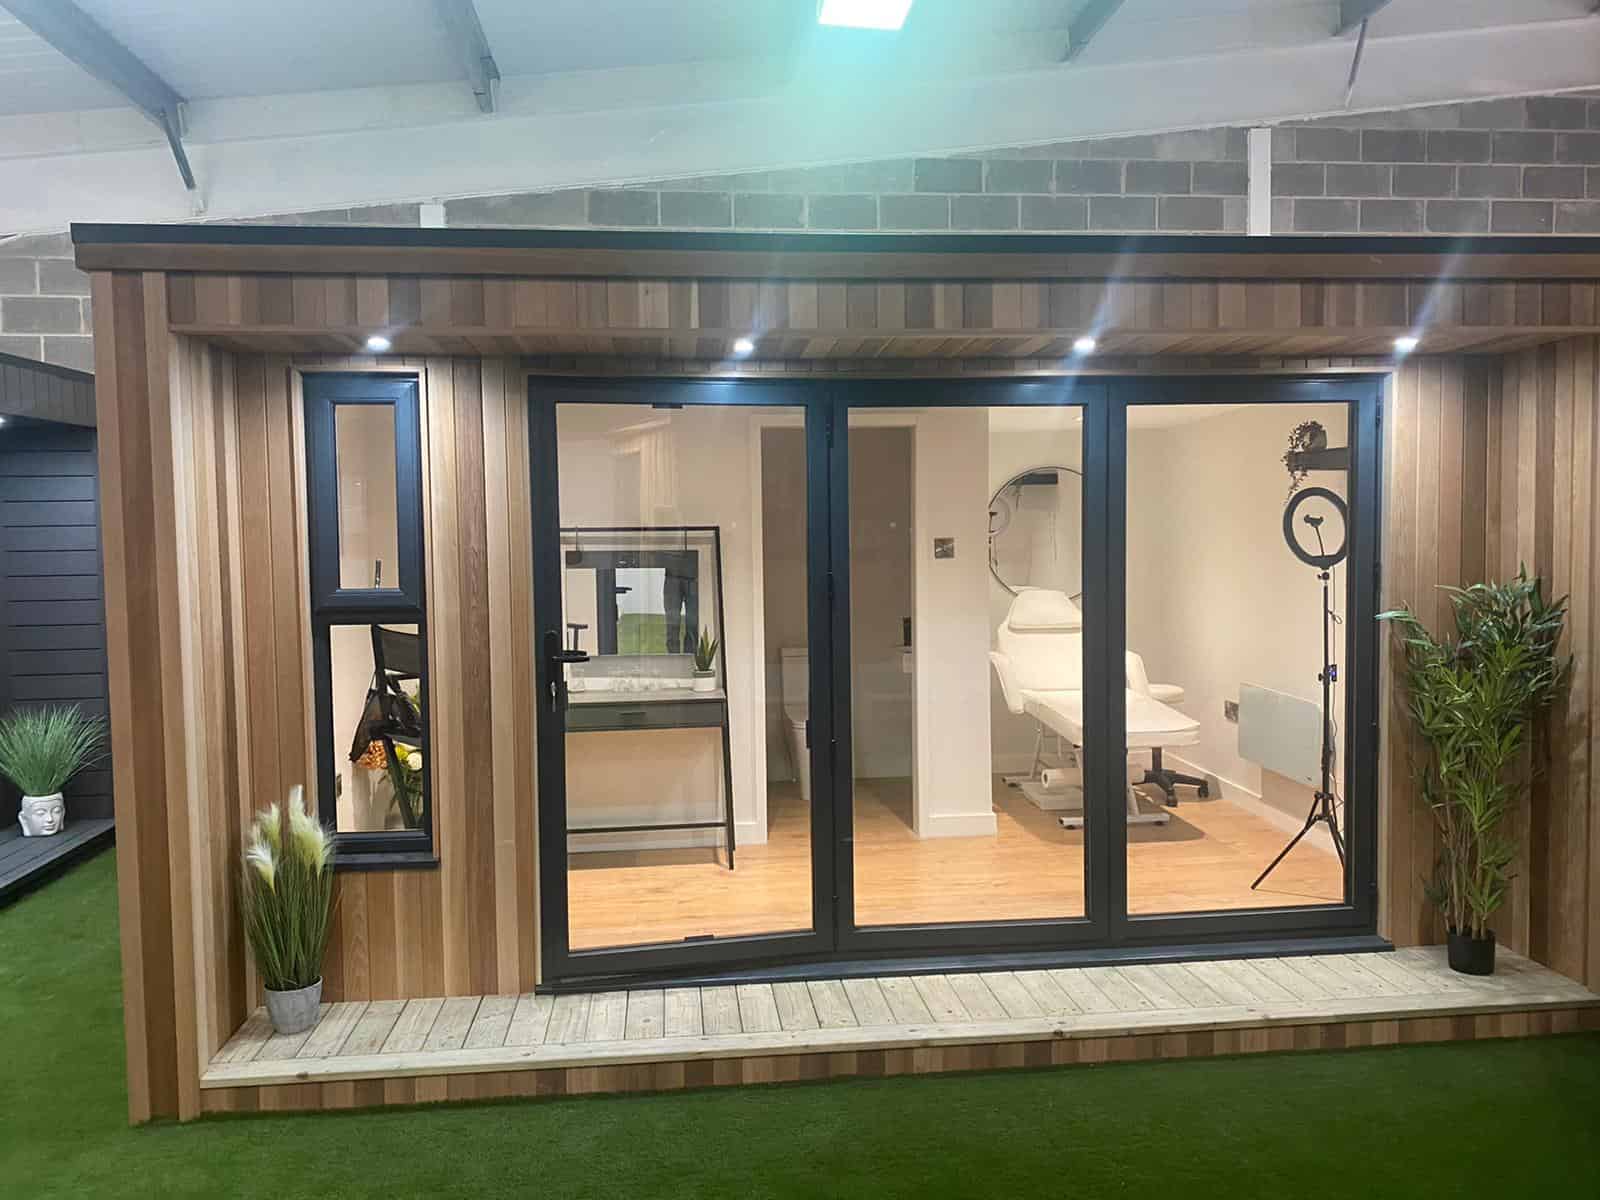 How To Convert A Shed Into A Salon